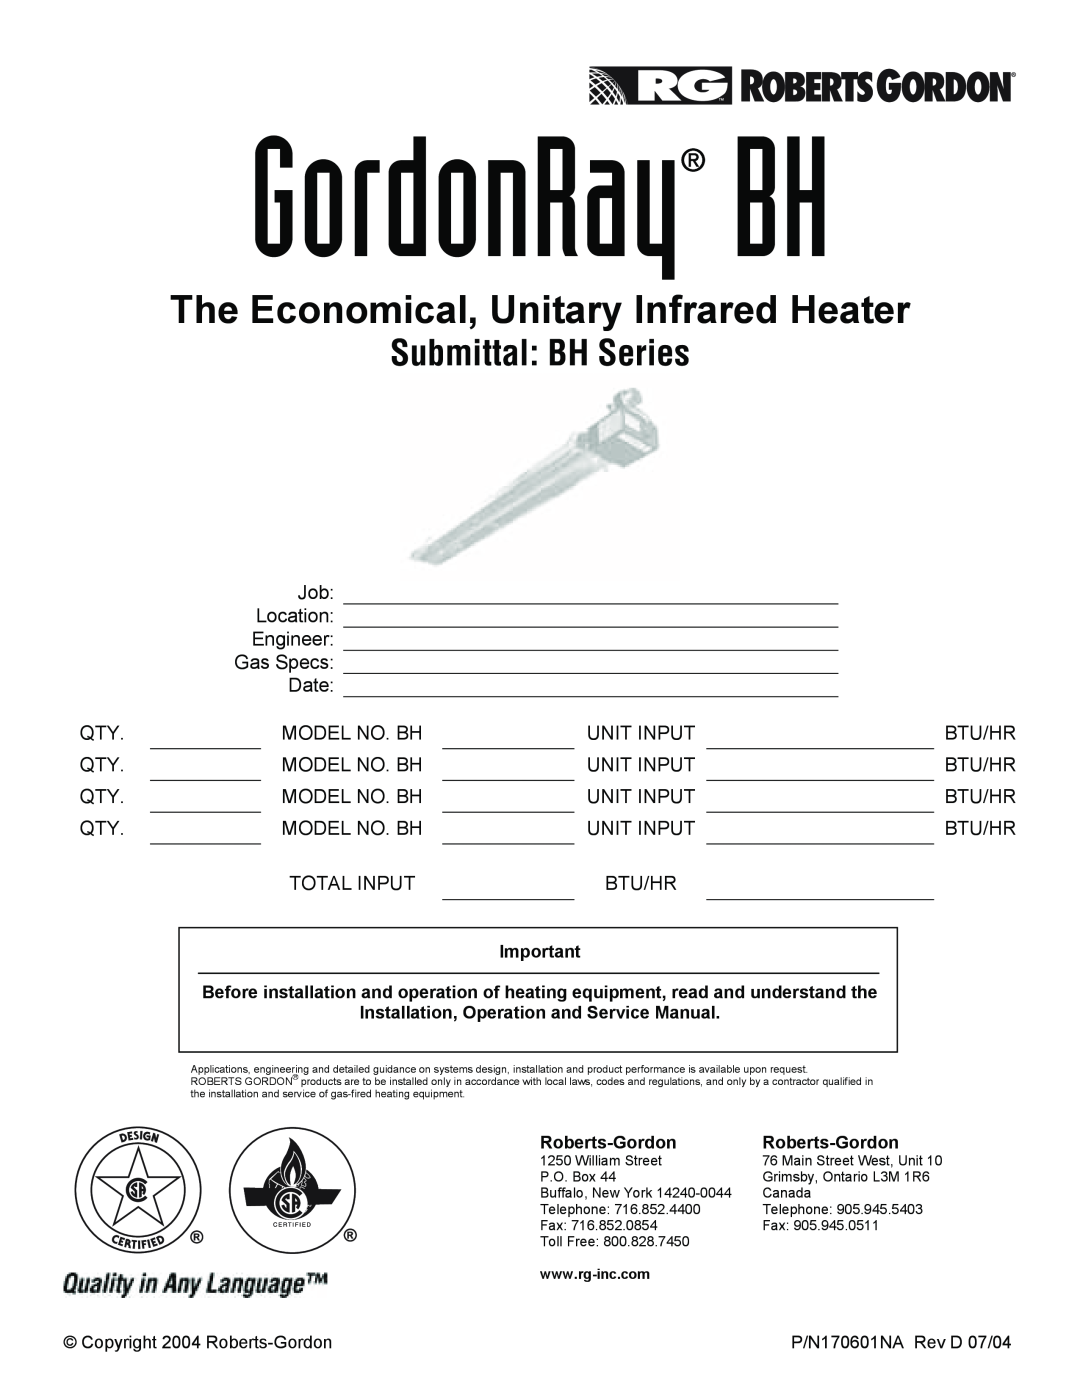 Roberts Gorden service manual GordonRay BH, The Economical, Unitary Infrared Heater, Submittal BH Series 